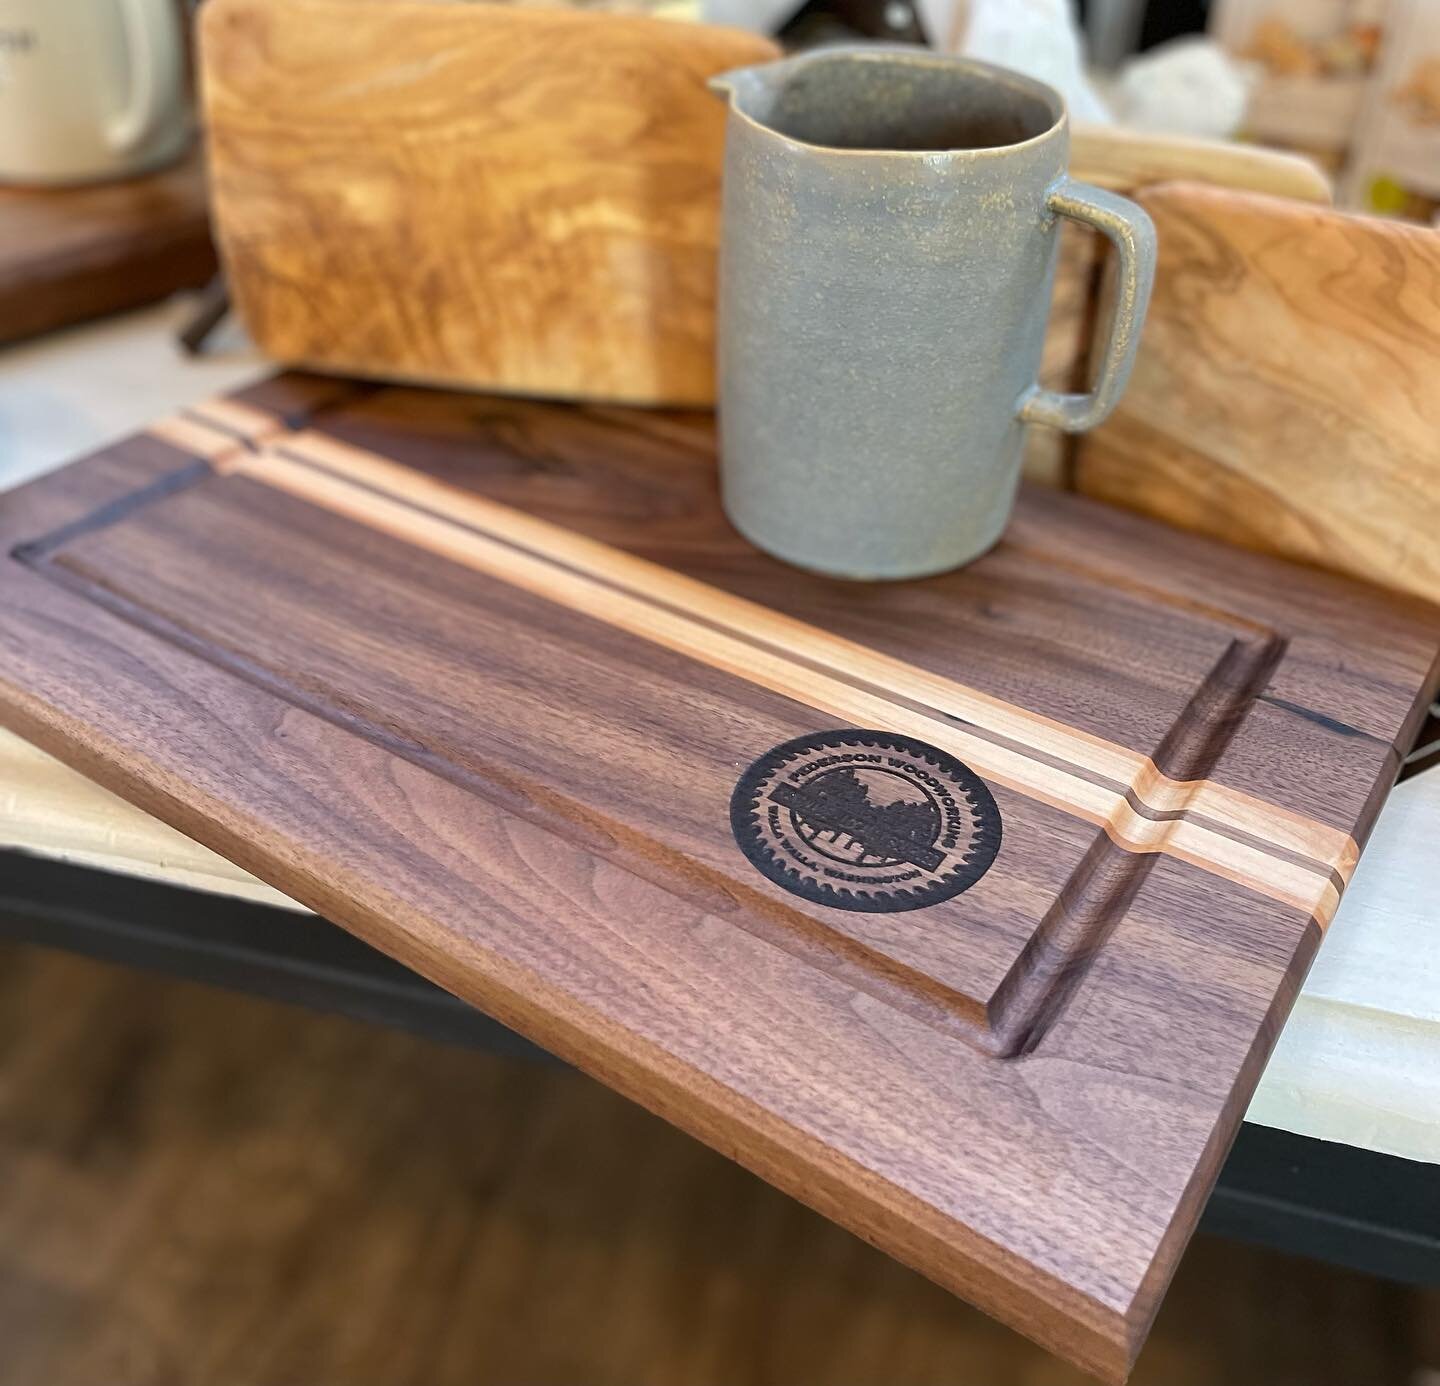 I&rsquo;m so proud to carry Chad Patterson&lsquo;s beautiful cheeseboards made right here in Walla Walla! @pederson.woodworking